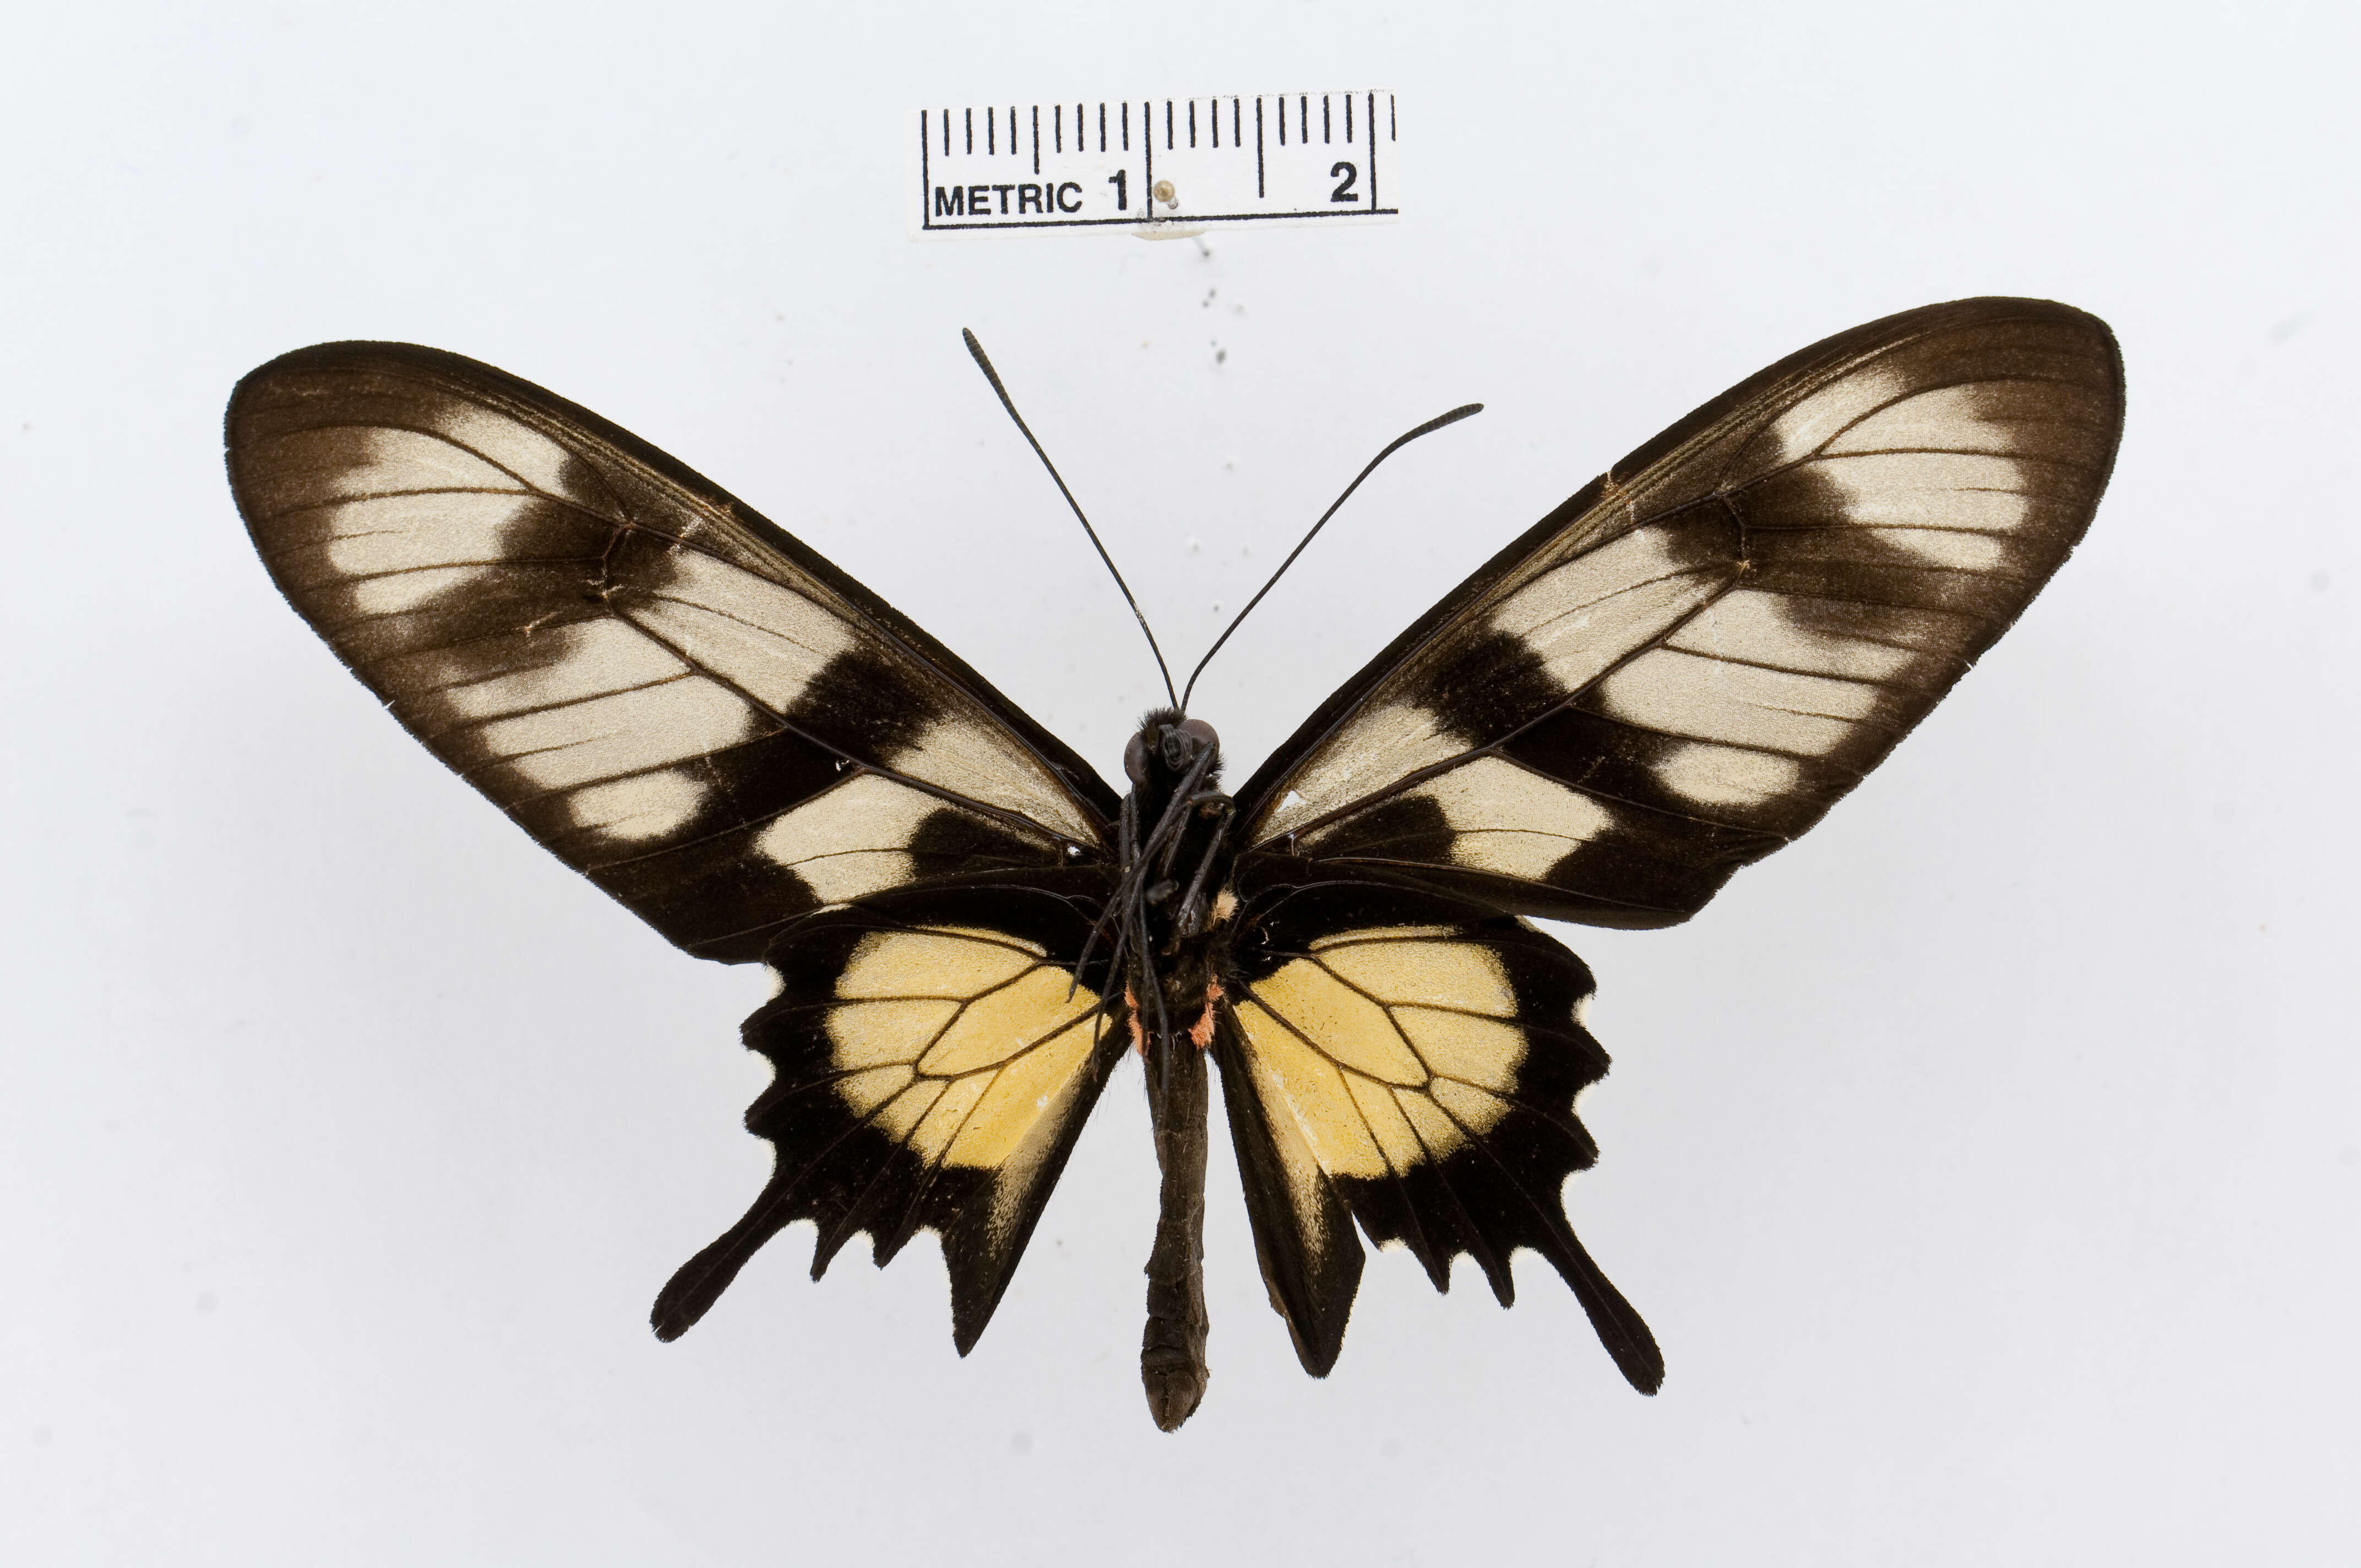 Image of Hahnel's Amazonian Swallowtail